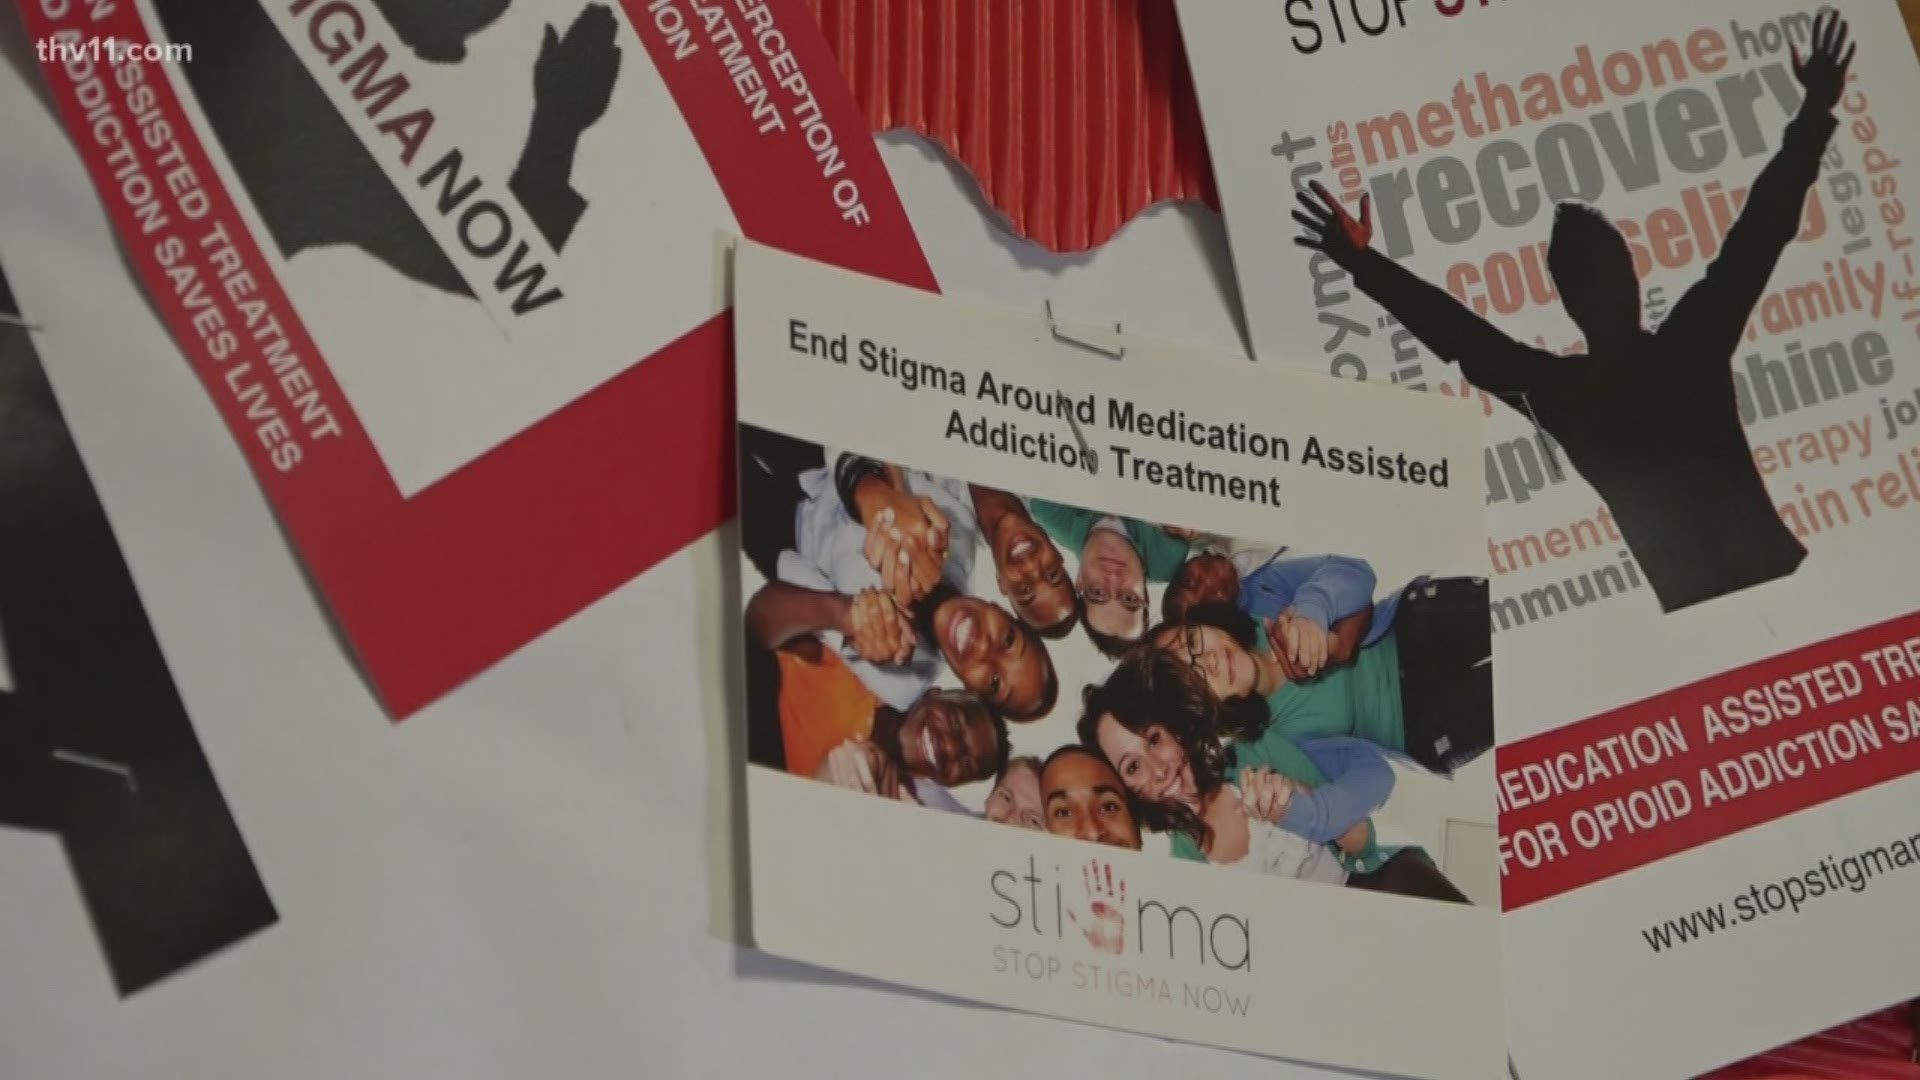 There are many types of recovery programs available for those battling a drug addiction. But one program is taking a different approach using medication along with therapy to treat the problem.